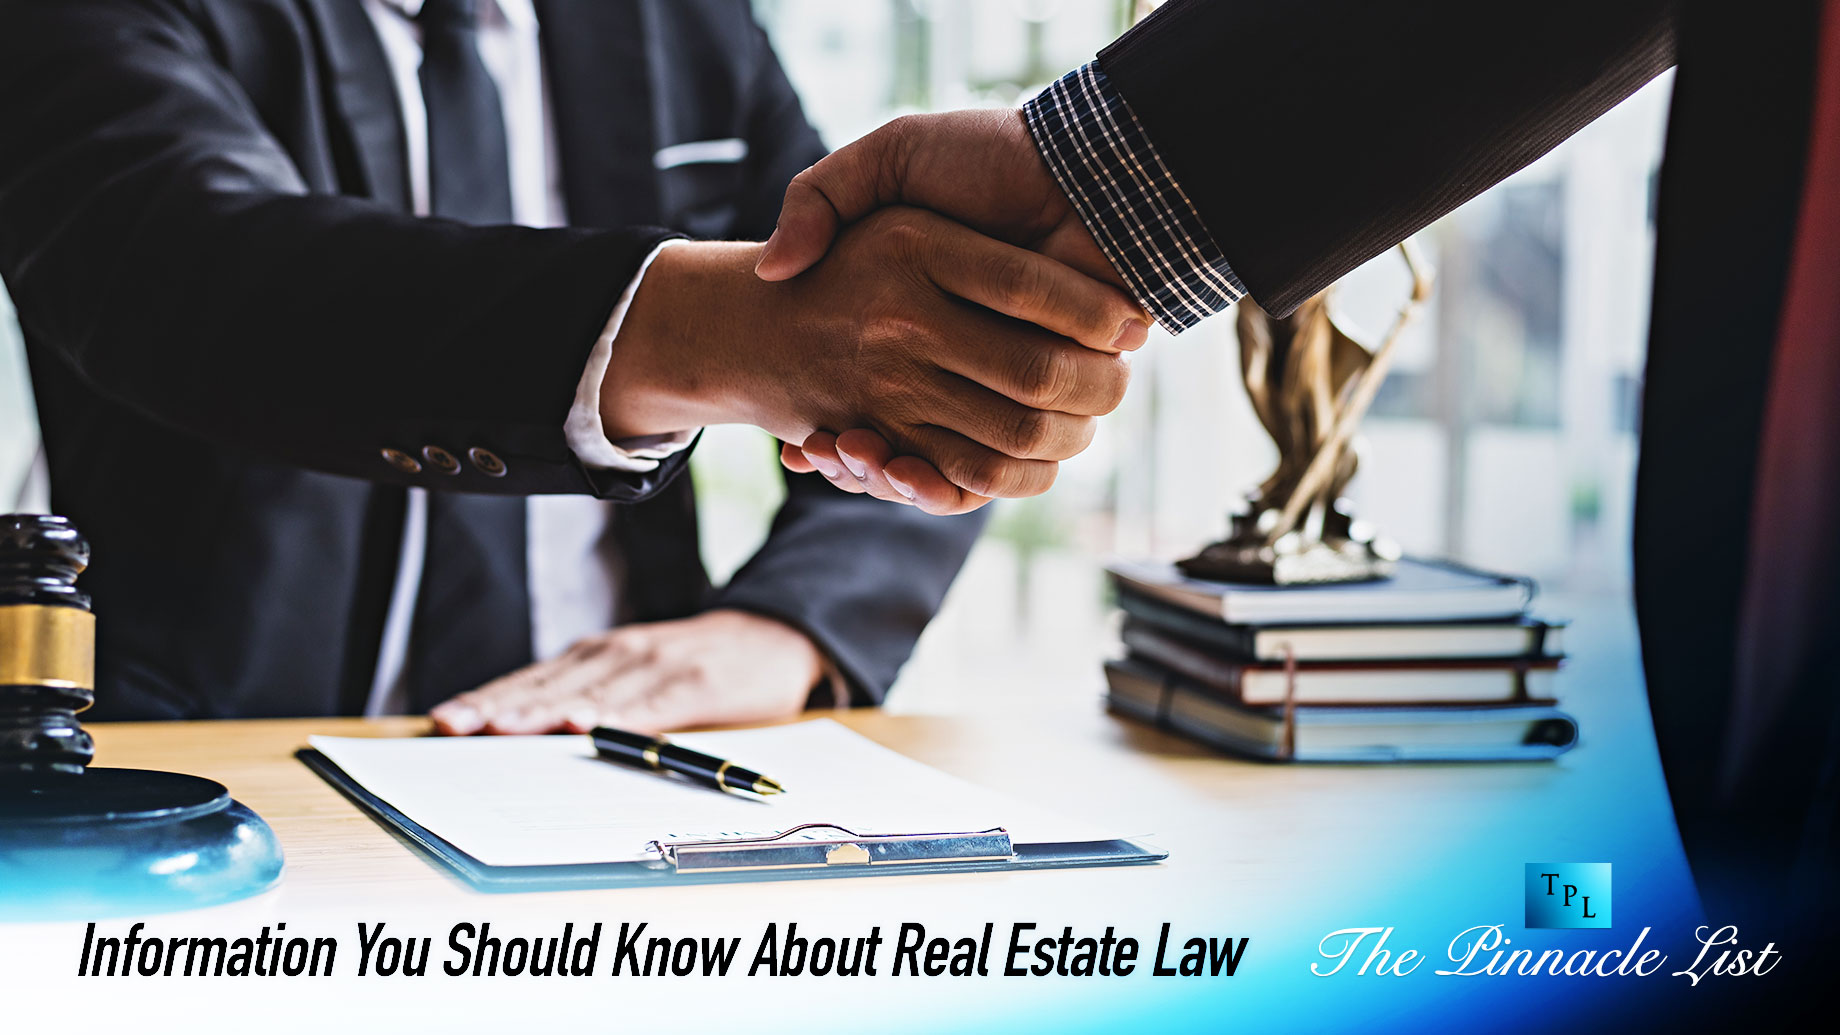 Information You Should Know About Real Estate Law